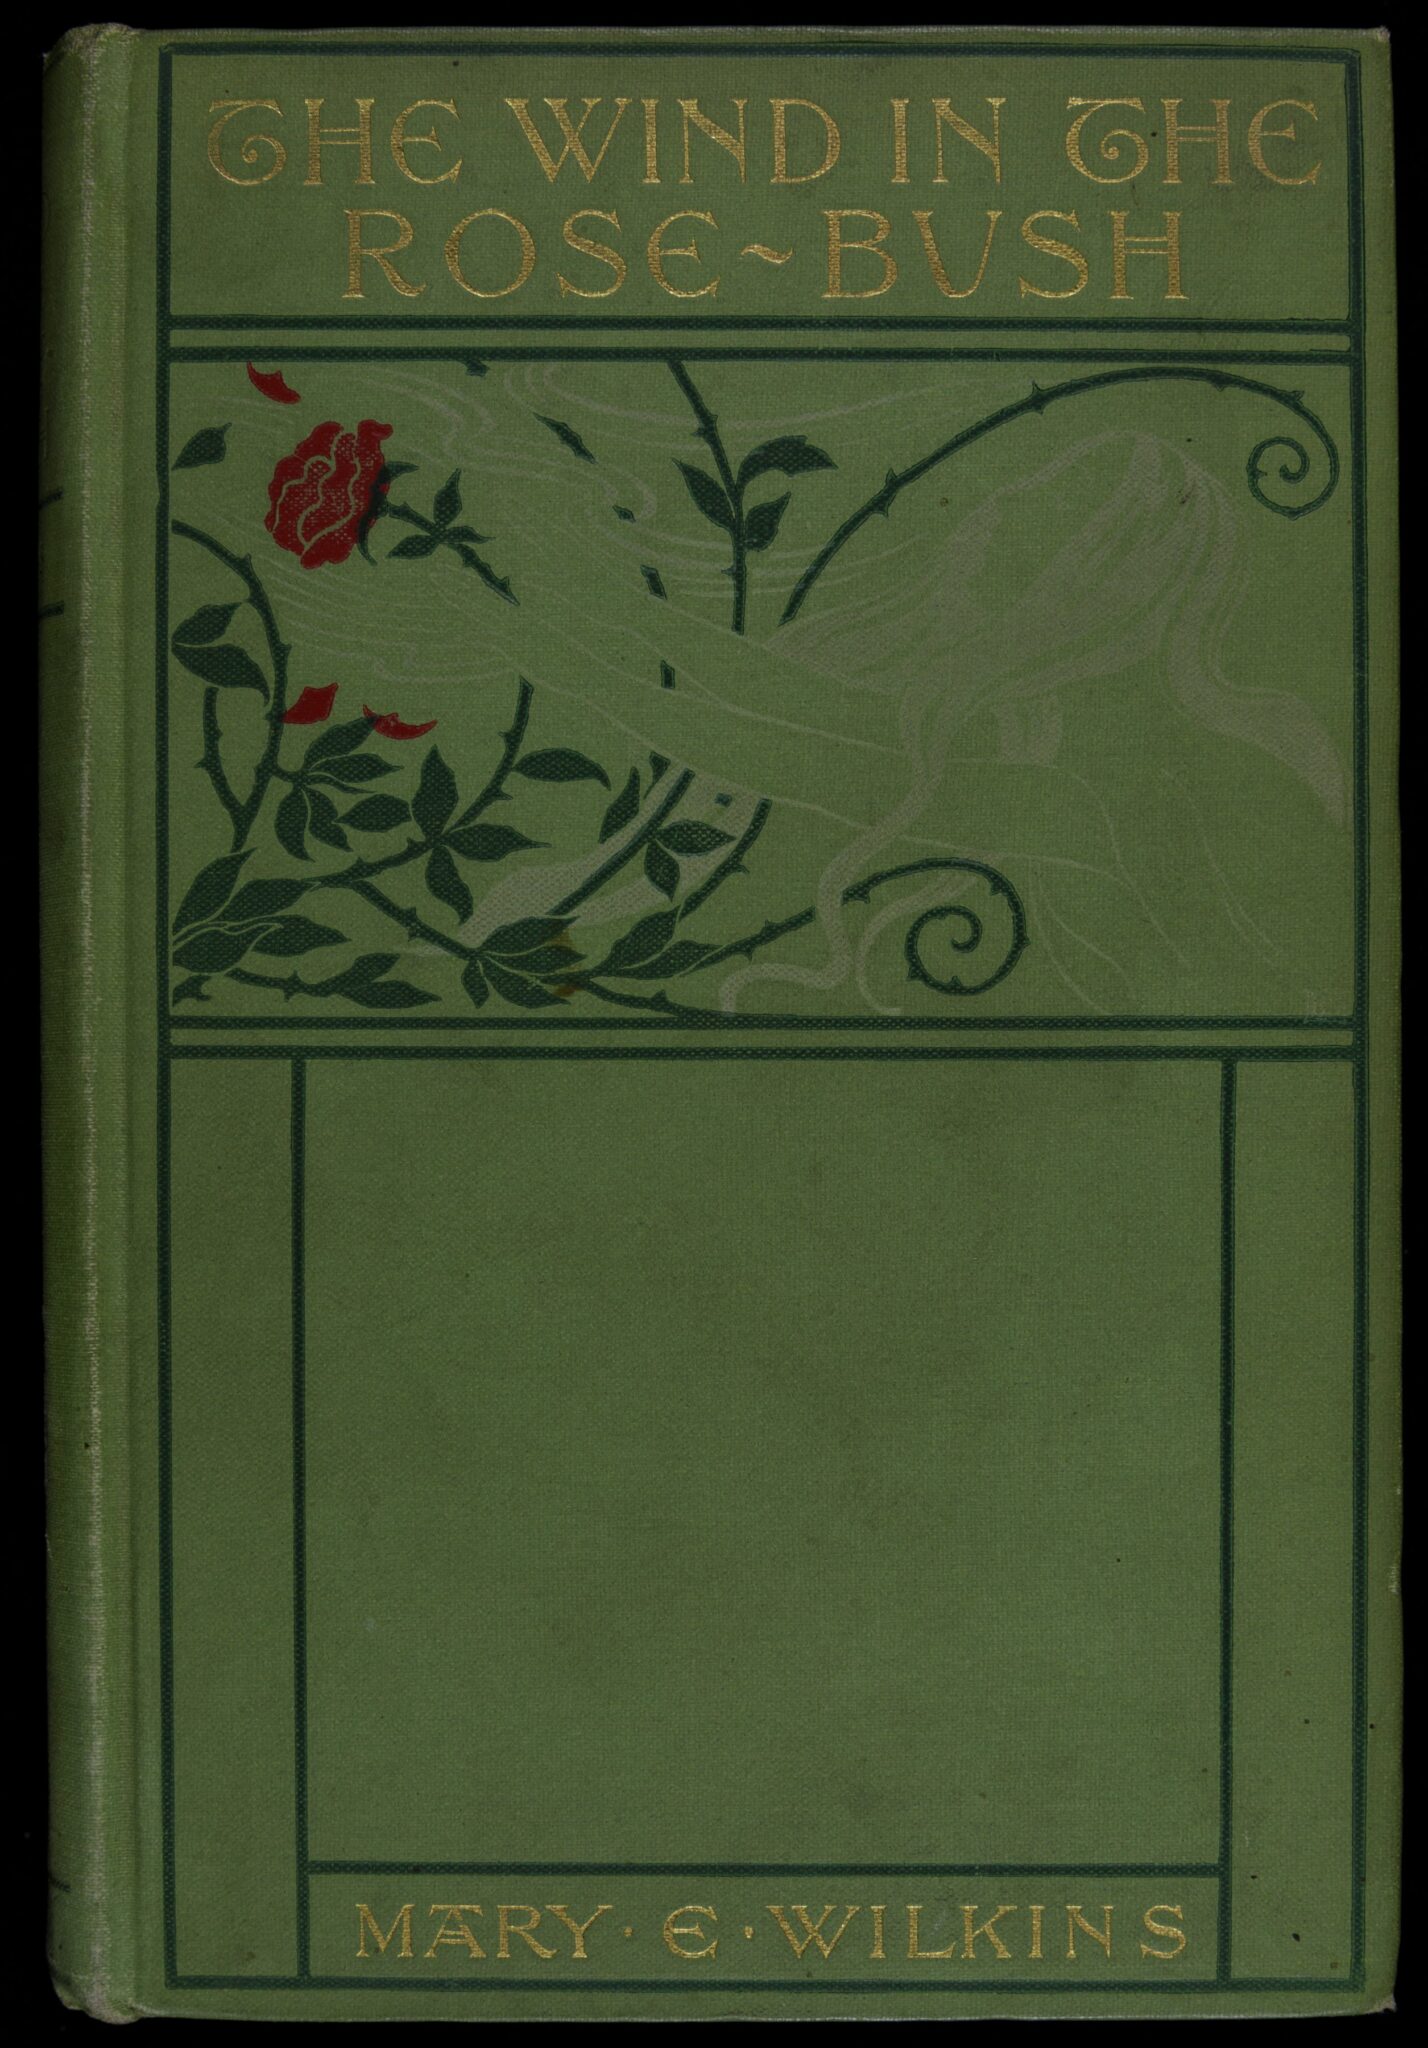 The Wind in the Rosebush, and Other Tales of the Supernatural by Mary E. Wilkins Freeman